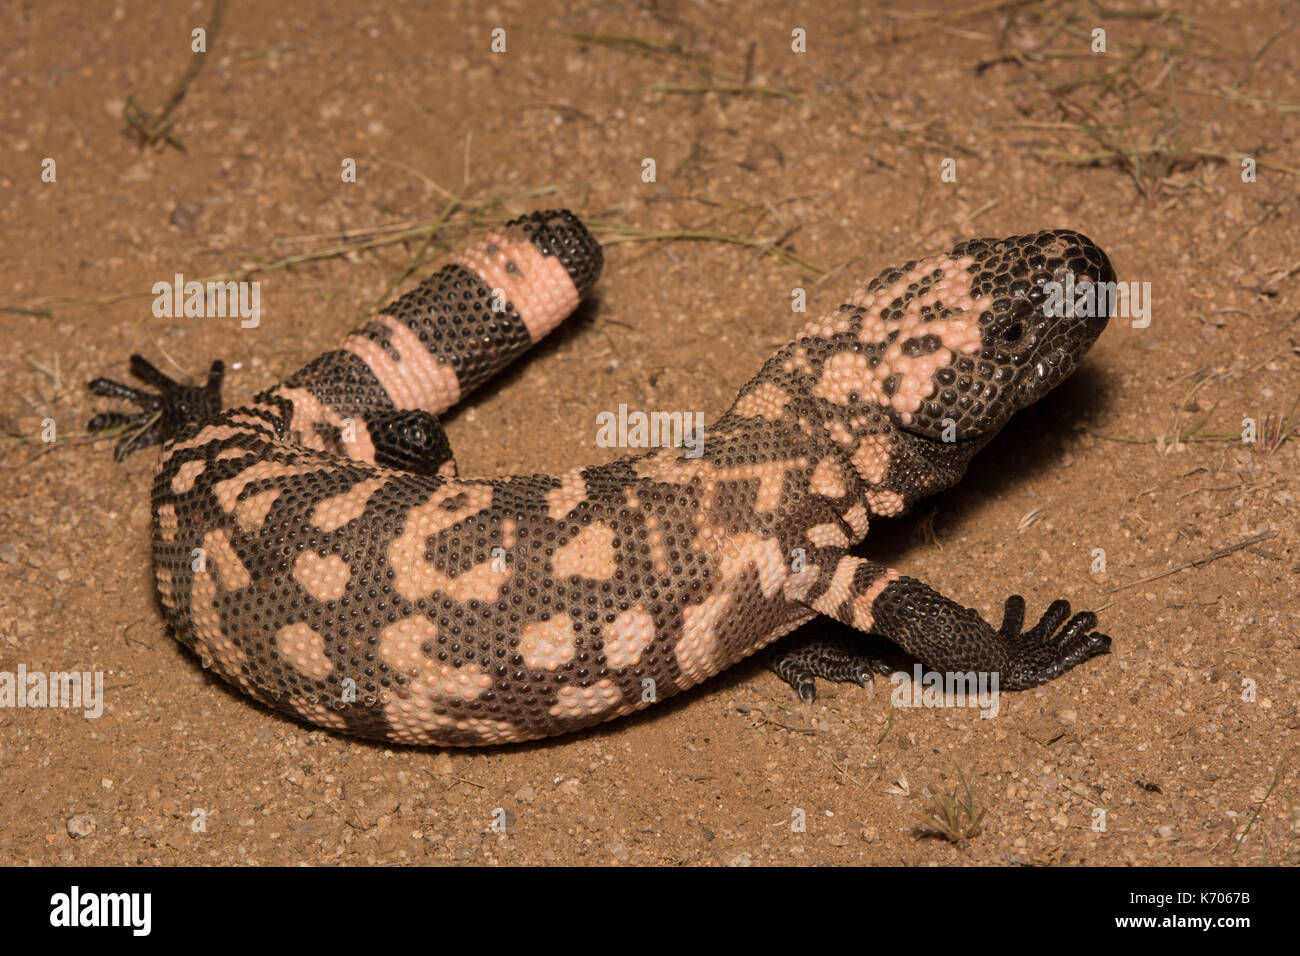 Gila Monster (Heloderma suspectum) from Sonora, Mexico. Stock Photo